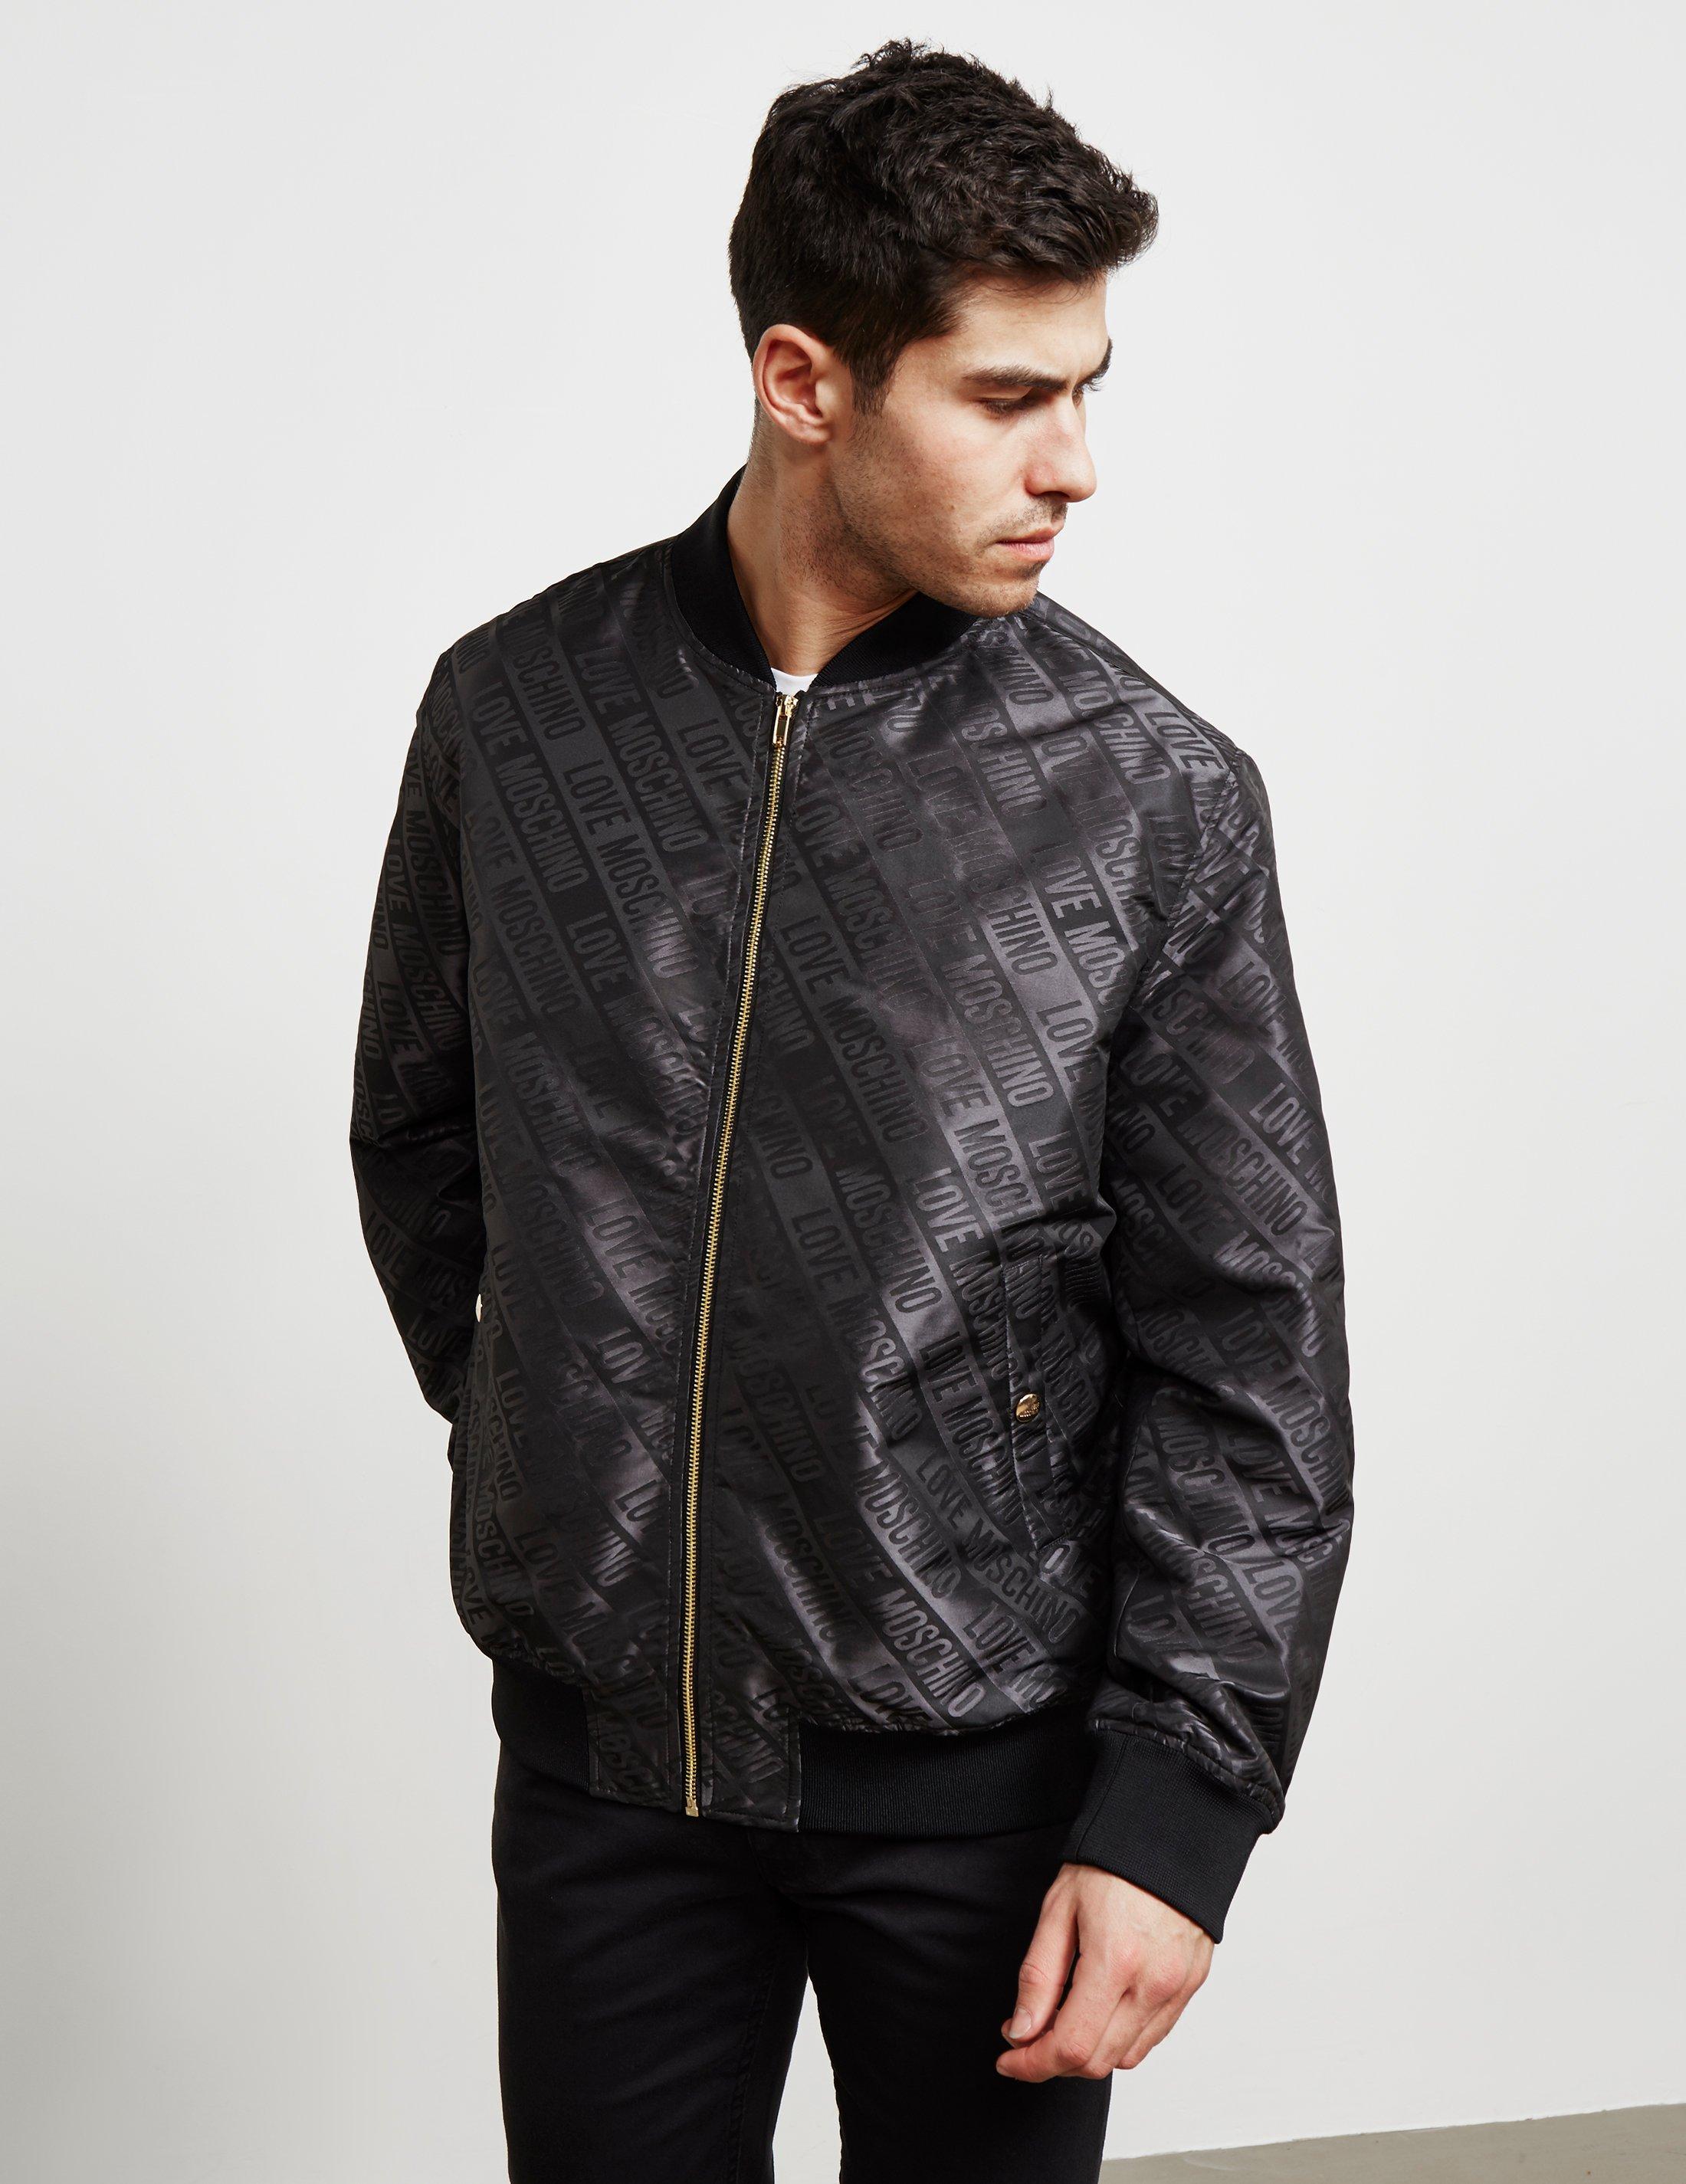 Refusal Bitterness Achieve Love Moschino All Over Print Bomber Jacket - Online Exclusive Black for Men  | Lyst